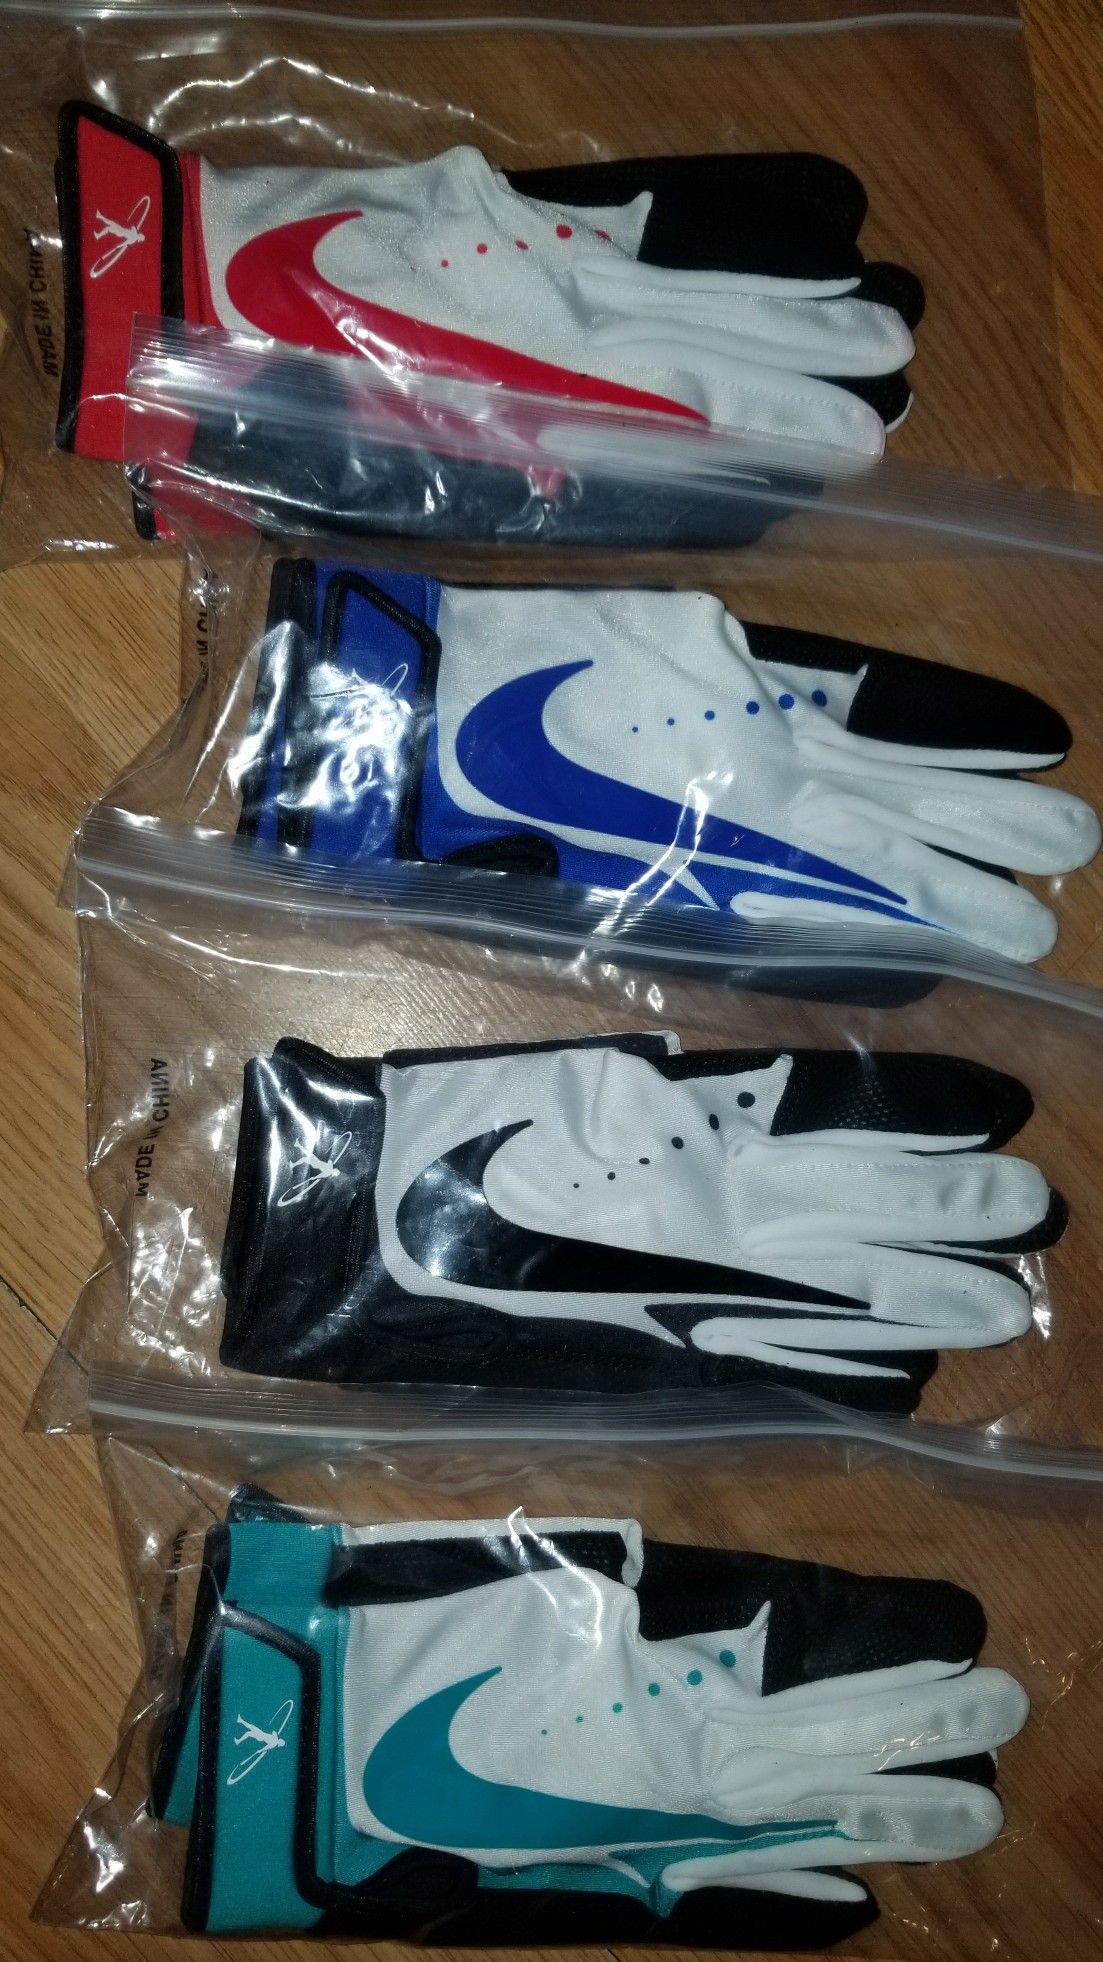 Brand New Nike Baseball Batting gloves Sizes Youth Large Assorted colors, You Pick